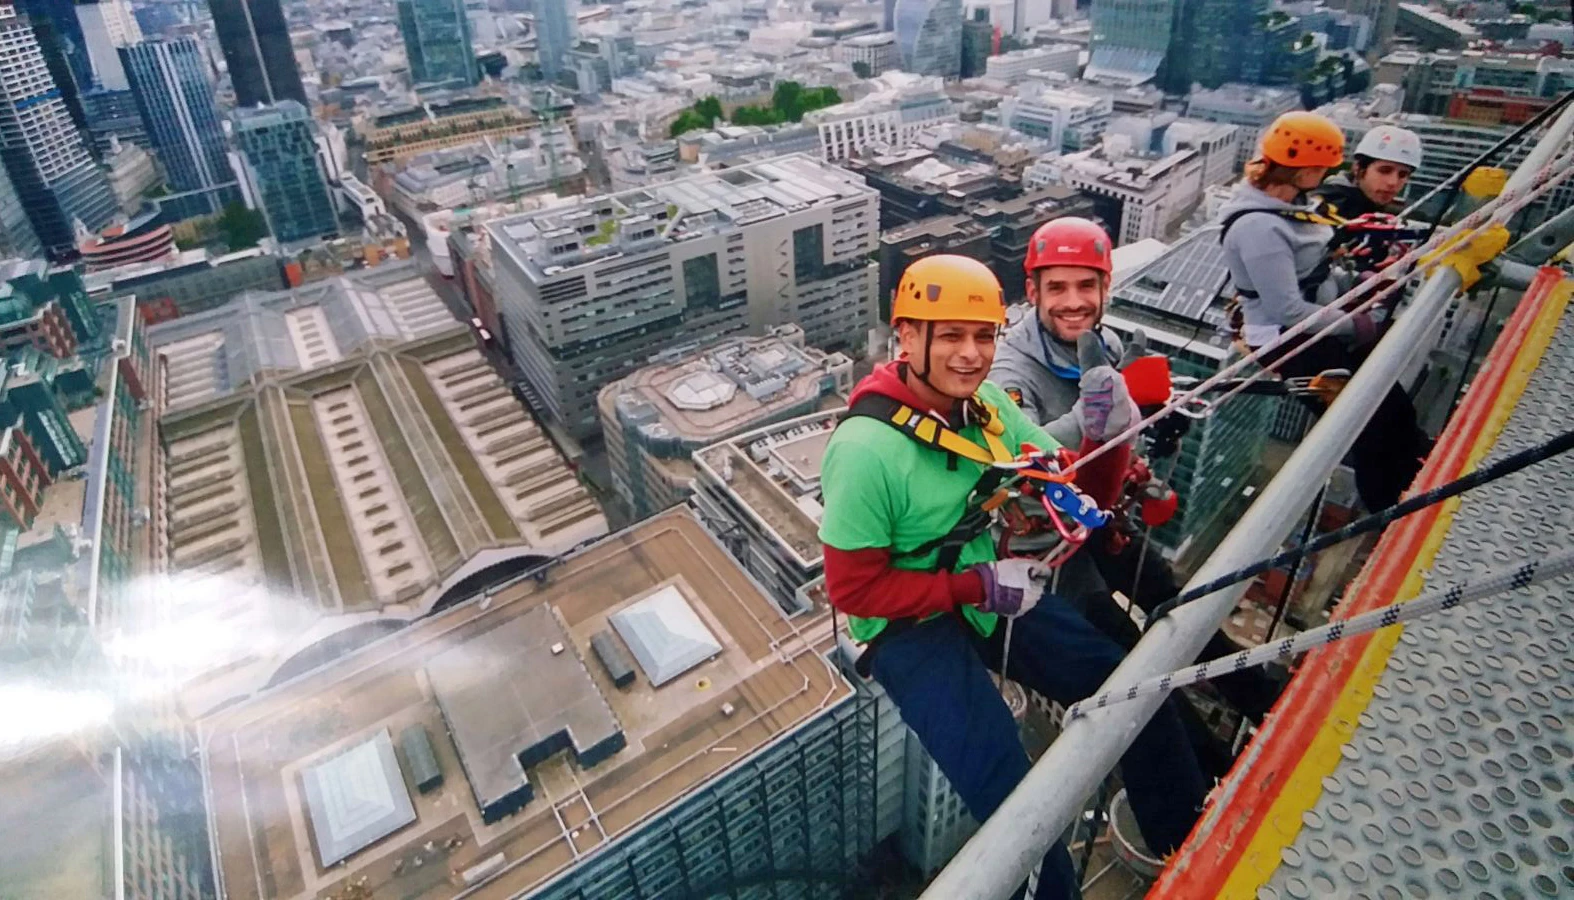 Ryan Dent (far left) Manager at Flip Out London E6 begins his 540ft abseil attempt for Richard House